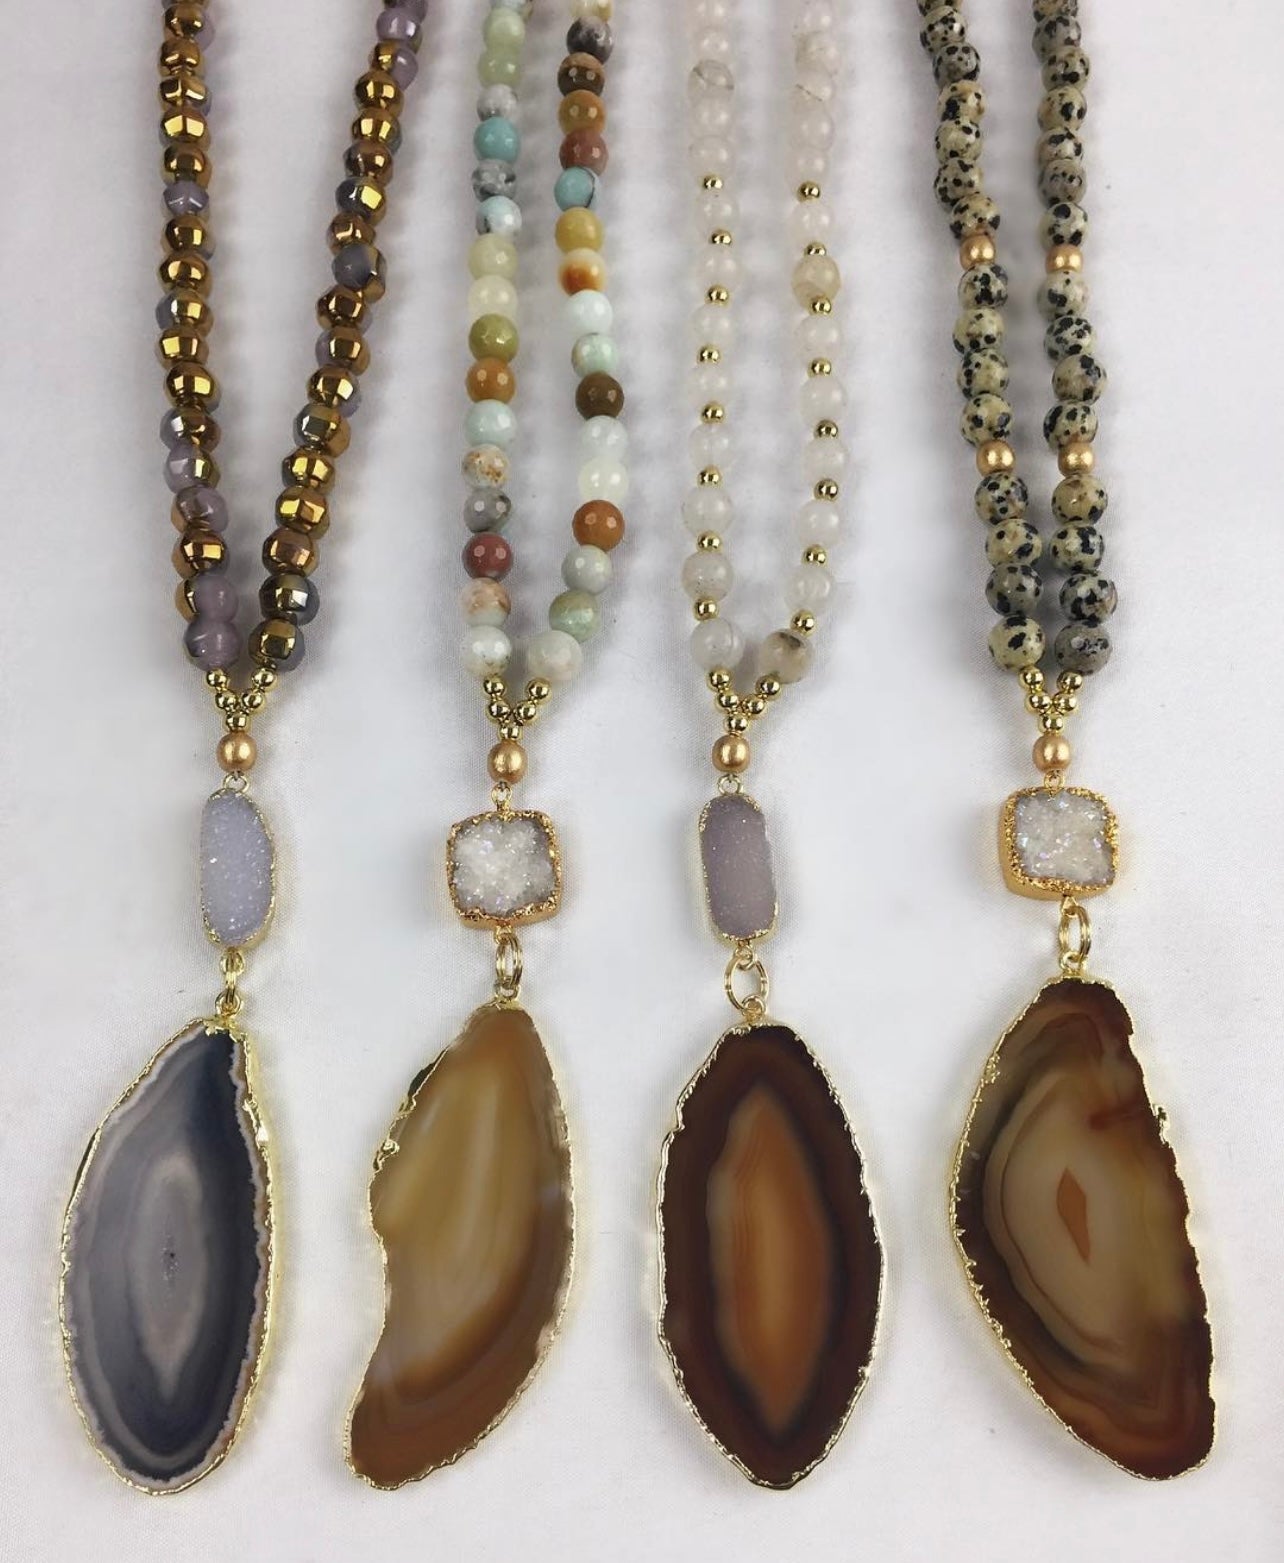 The Agate Handmade Necklace Collection